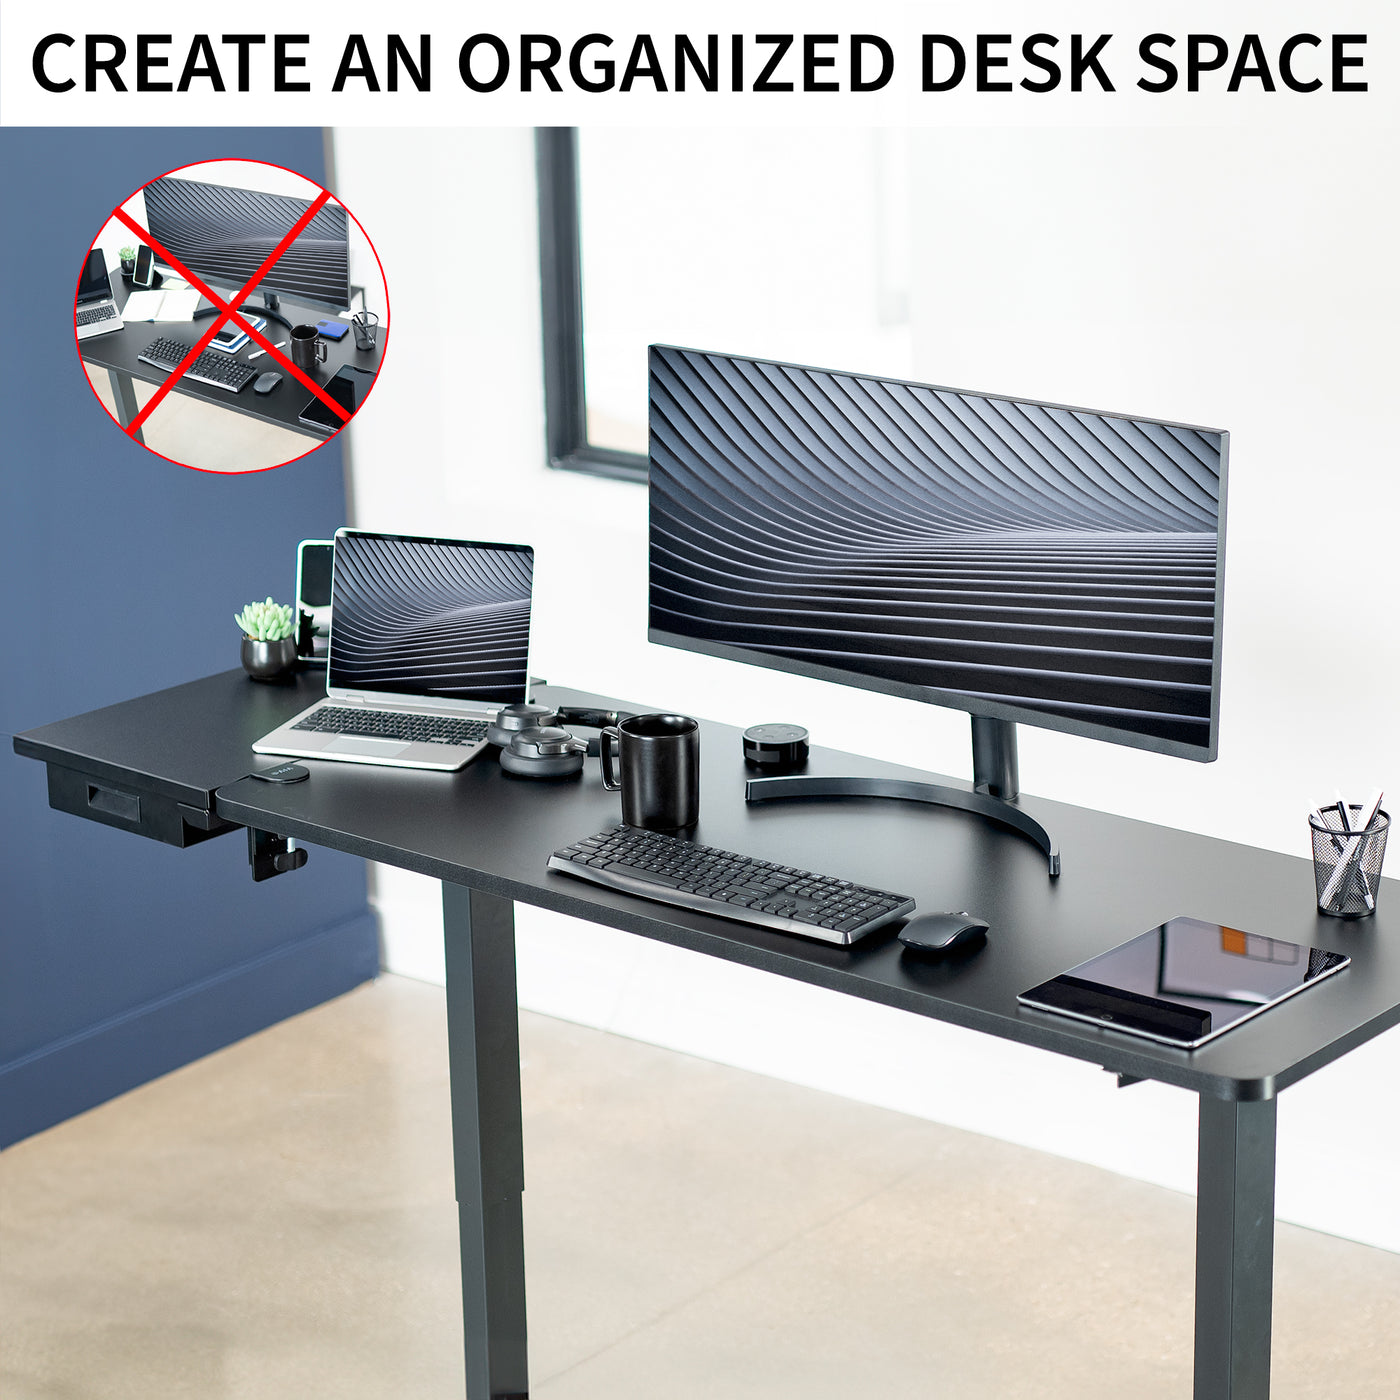 Black Clamp-on 24" x 14" Desk Extension with Storage